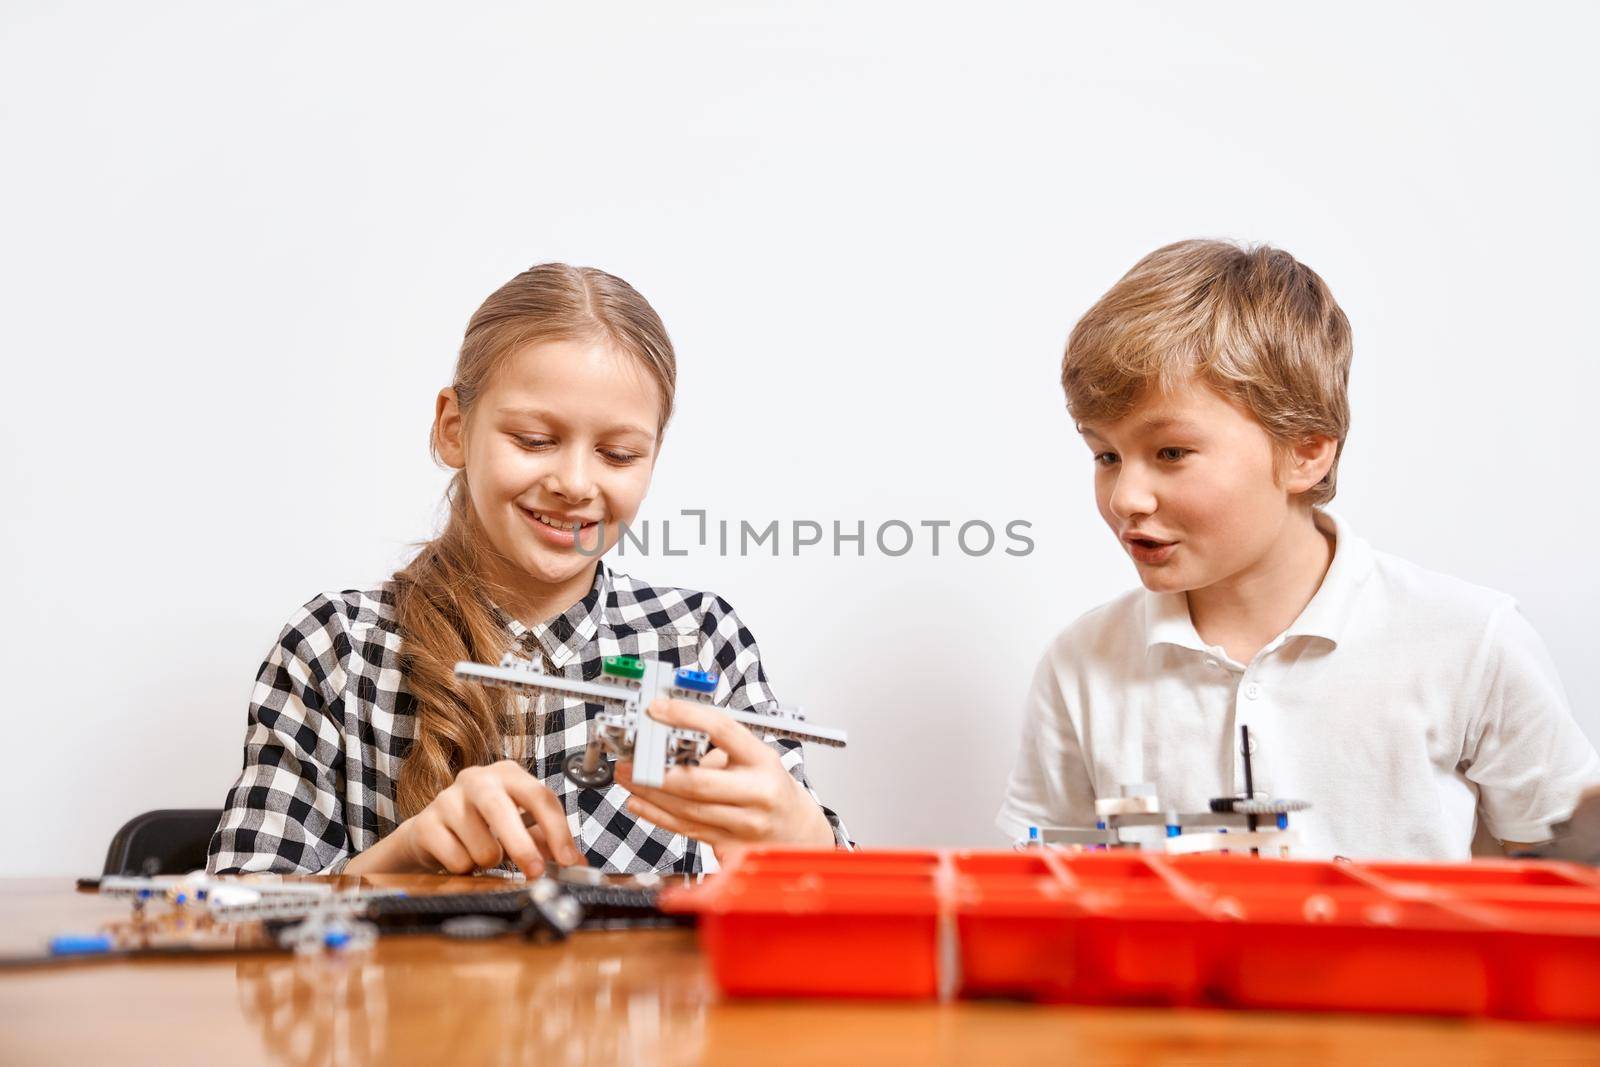 Interesting building kit for kids on table. Front view of boy and girl having fun, creating air vehicle. Science engineering. Nice interested friends smiling, chatting and working on project together.